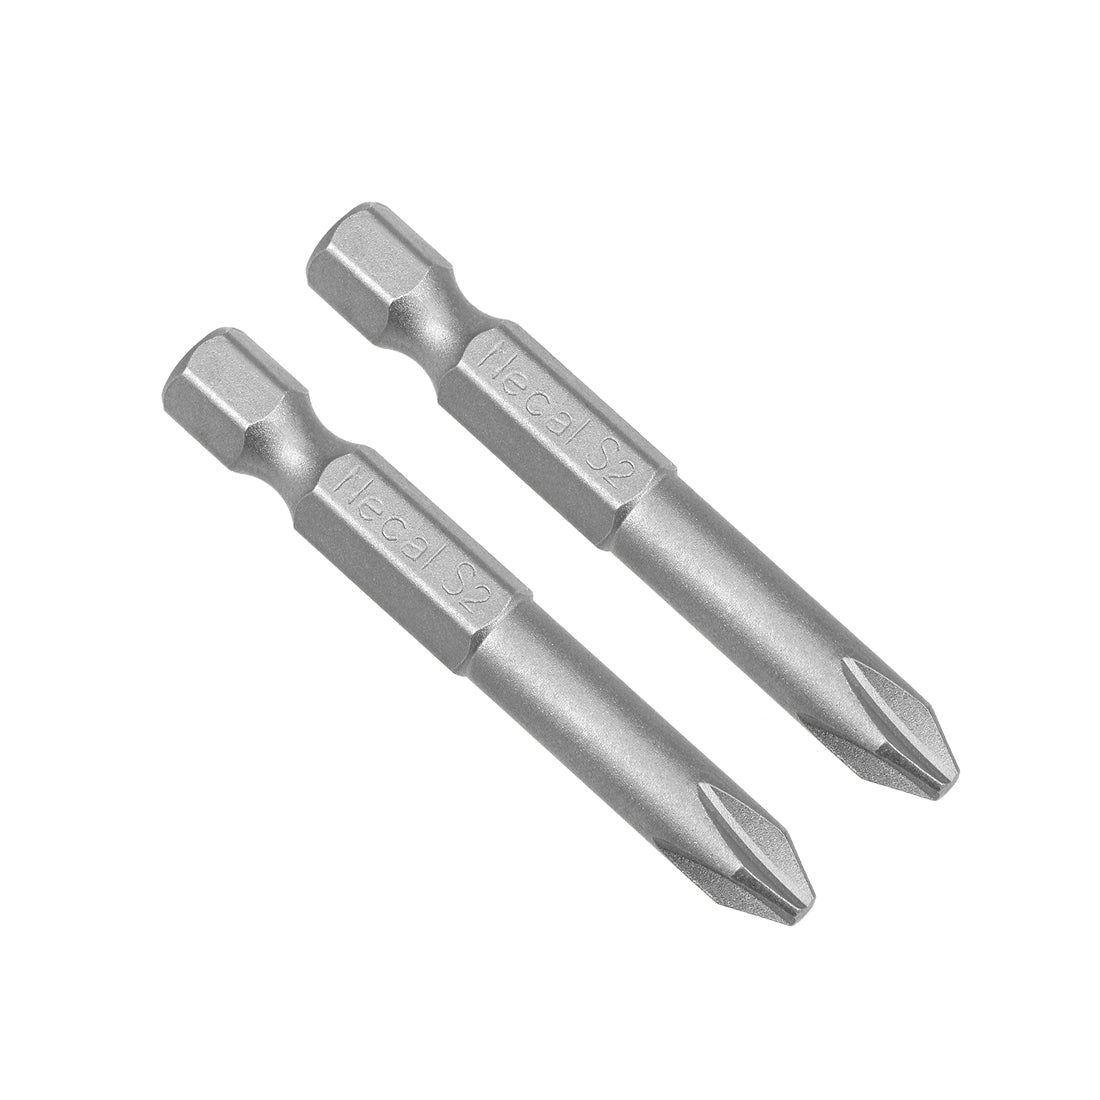 uxcell Uxcell 2 Pcs 6mm PH2 Magnetic Phillips Screwdriver Bits, 1/4 Inch Hex Shank 2-inch Length S2 Power Tool